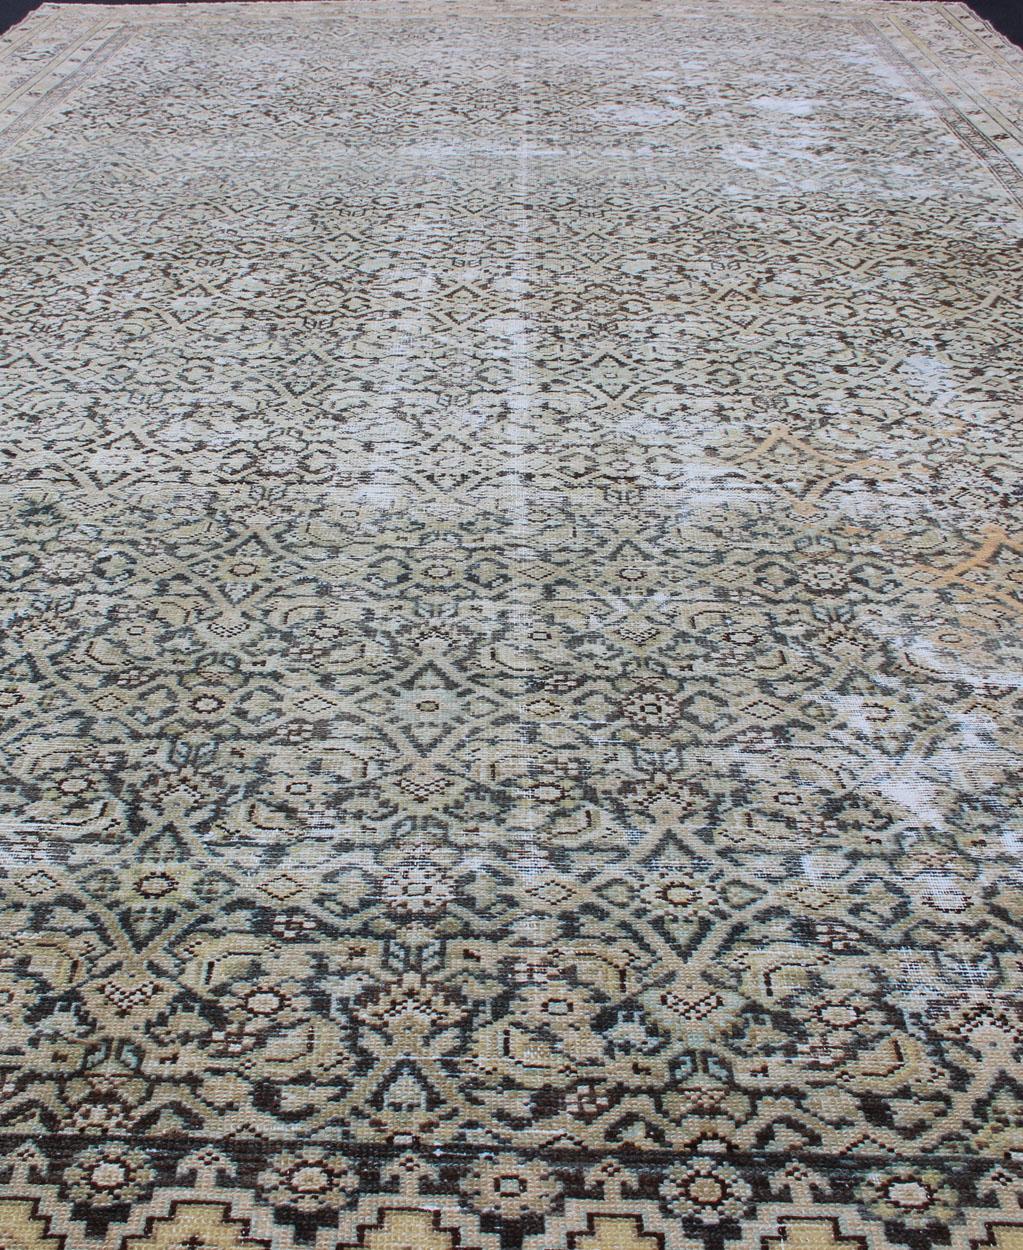 Large Gallery Persian Malayer Runner with Herati Design in Gray and Earth Tones 8